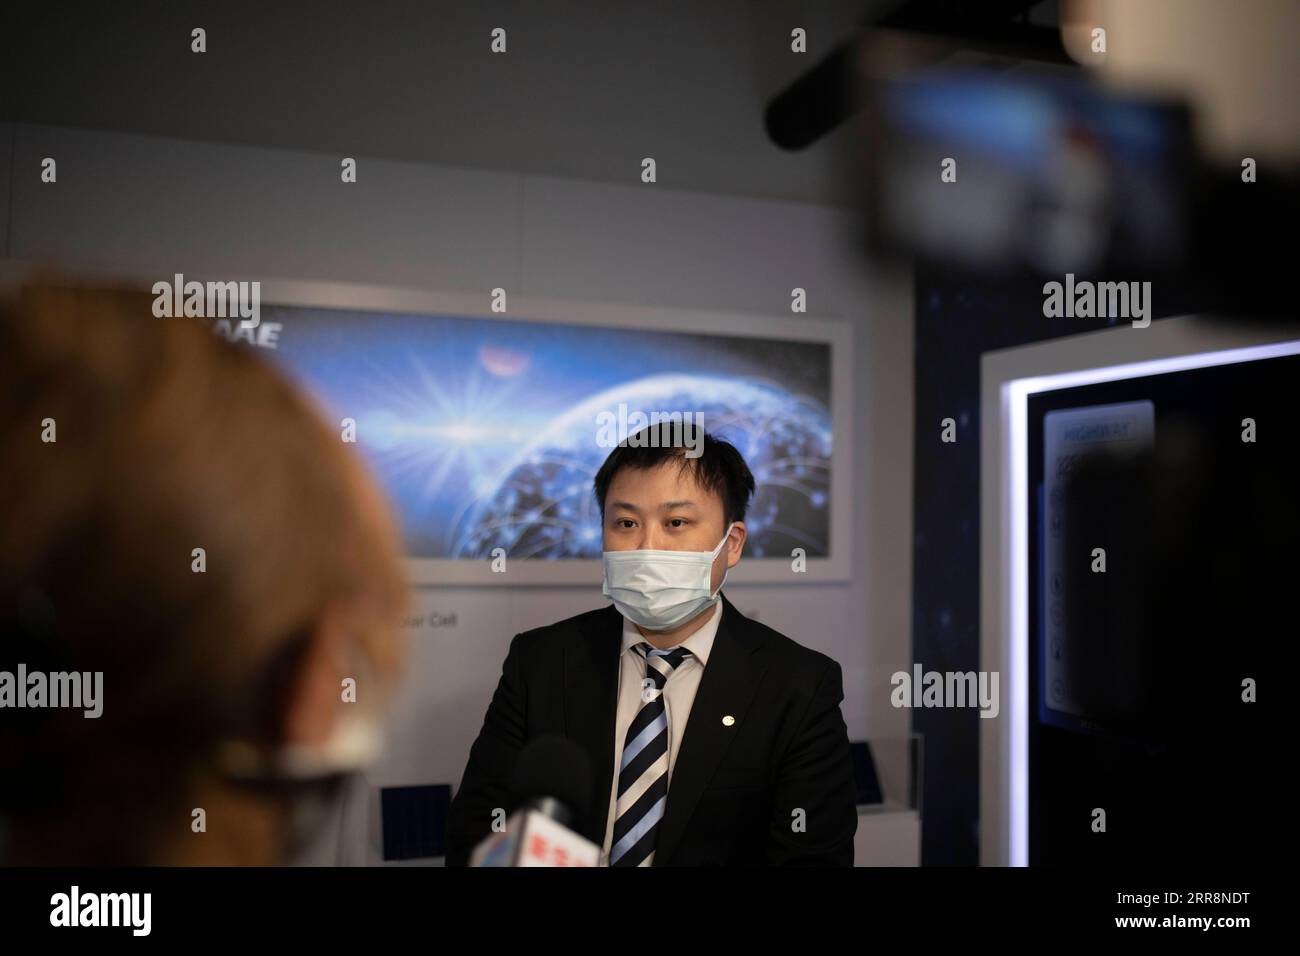 210513 -- ISTANBUL, May 13, 2021 -- Bao Yue, General Manager of HT Solar Energy, receives an interview with Xinhua in Istanbul, Turkey, on May 7, 2021. Turkey and China are mutually benefiting from each other s advantages in the field of solar panel production. Photo by /XinhuaTO GO WITH: Roundup: Turkey, China create win-win cooperation in solar panel production TURKEY-ISTANBUL-CHINA-SOLAR PANEL PRODUCTION-COOPERATION OsmanxOrsal PUBLICATIONxNOTxINxCHN Stock Photo